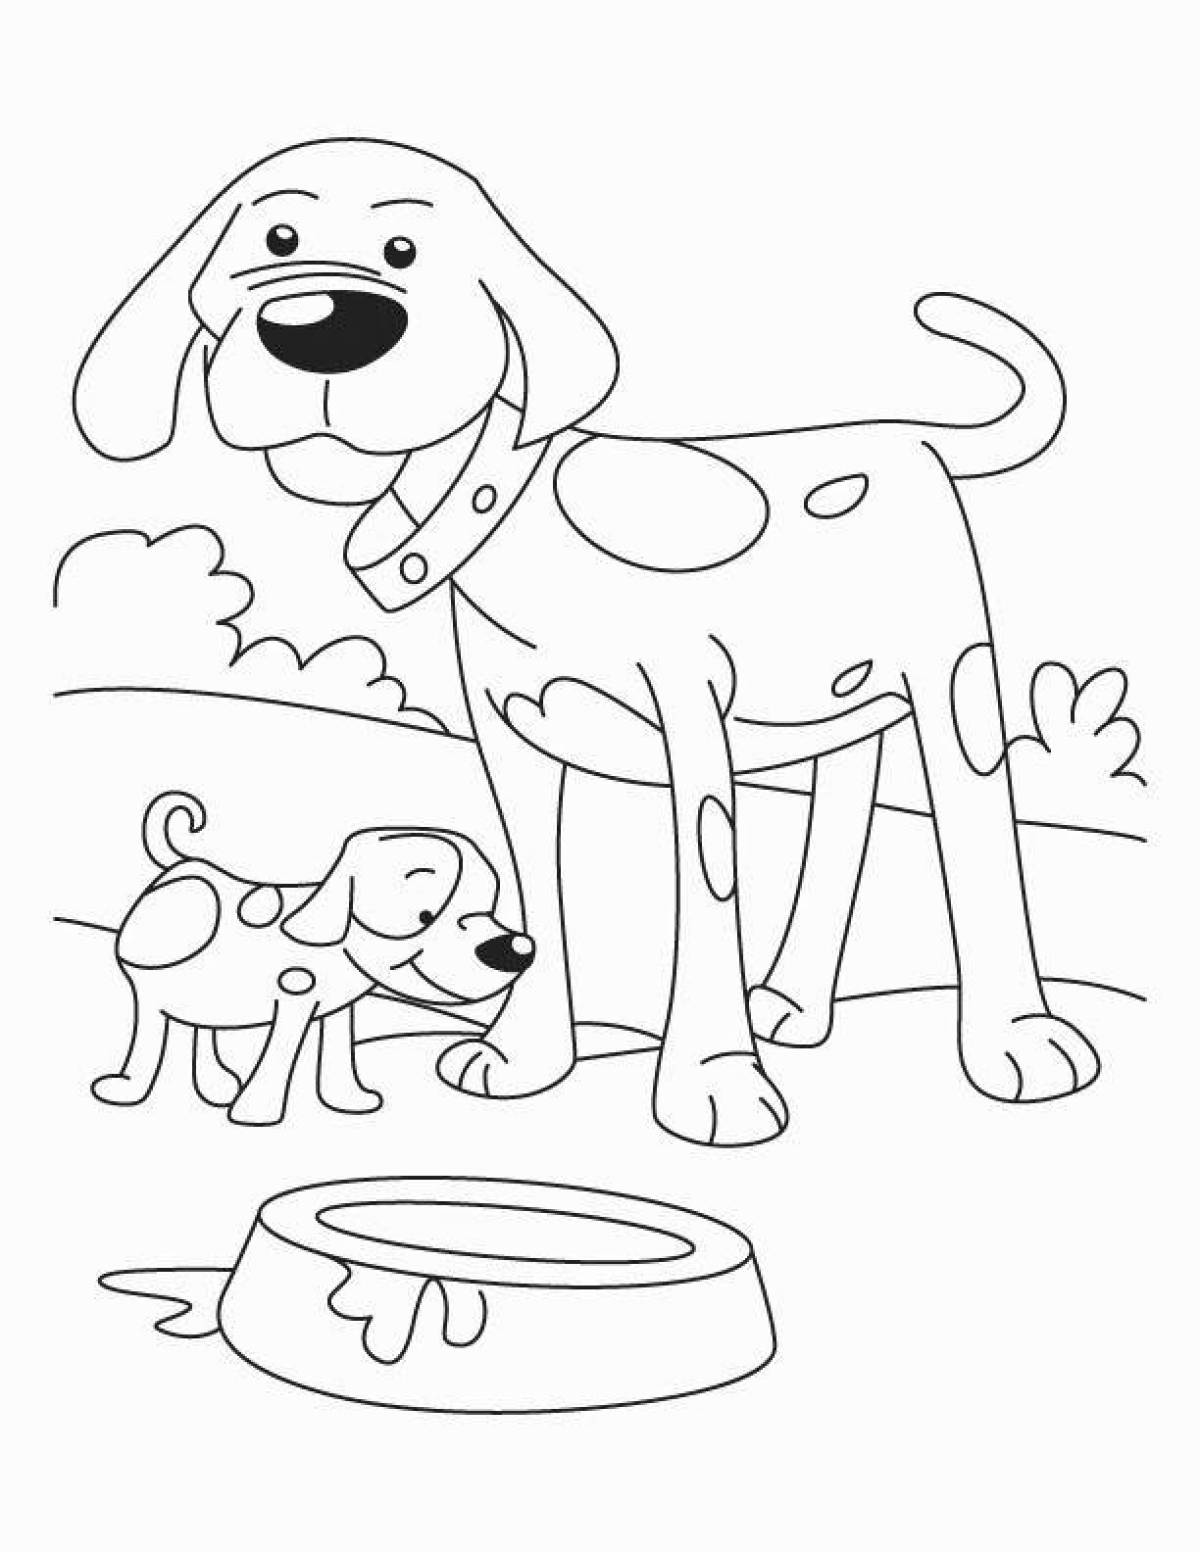 Alert coloring page image of a dog for children